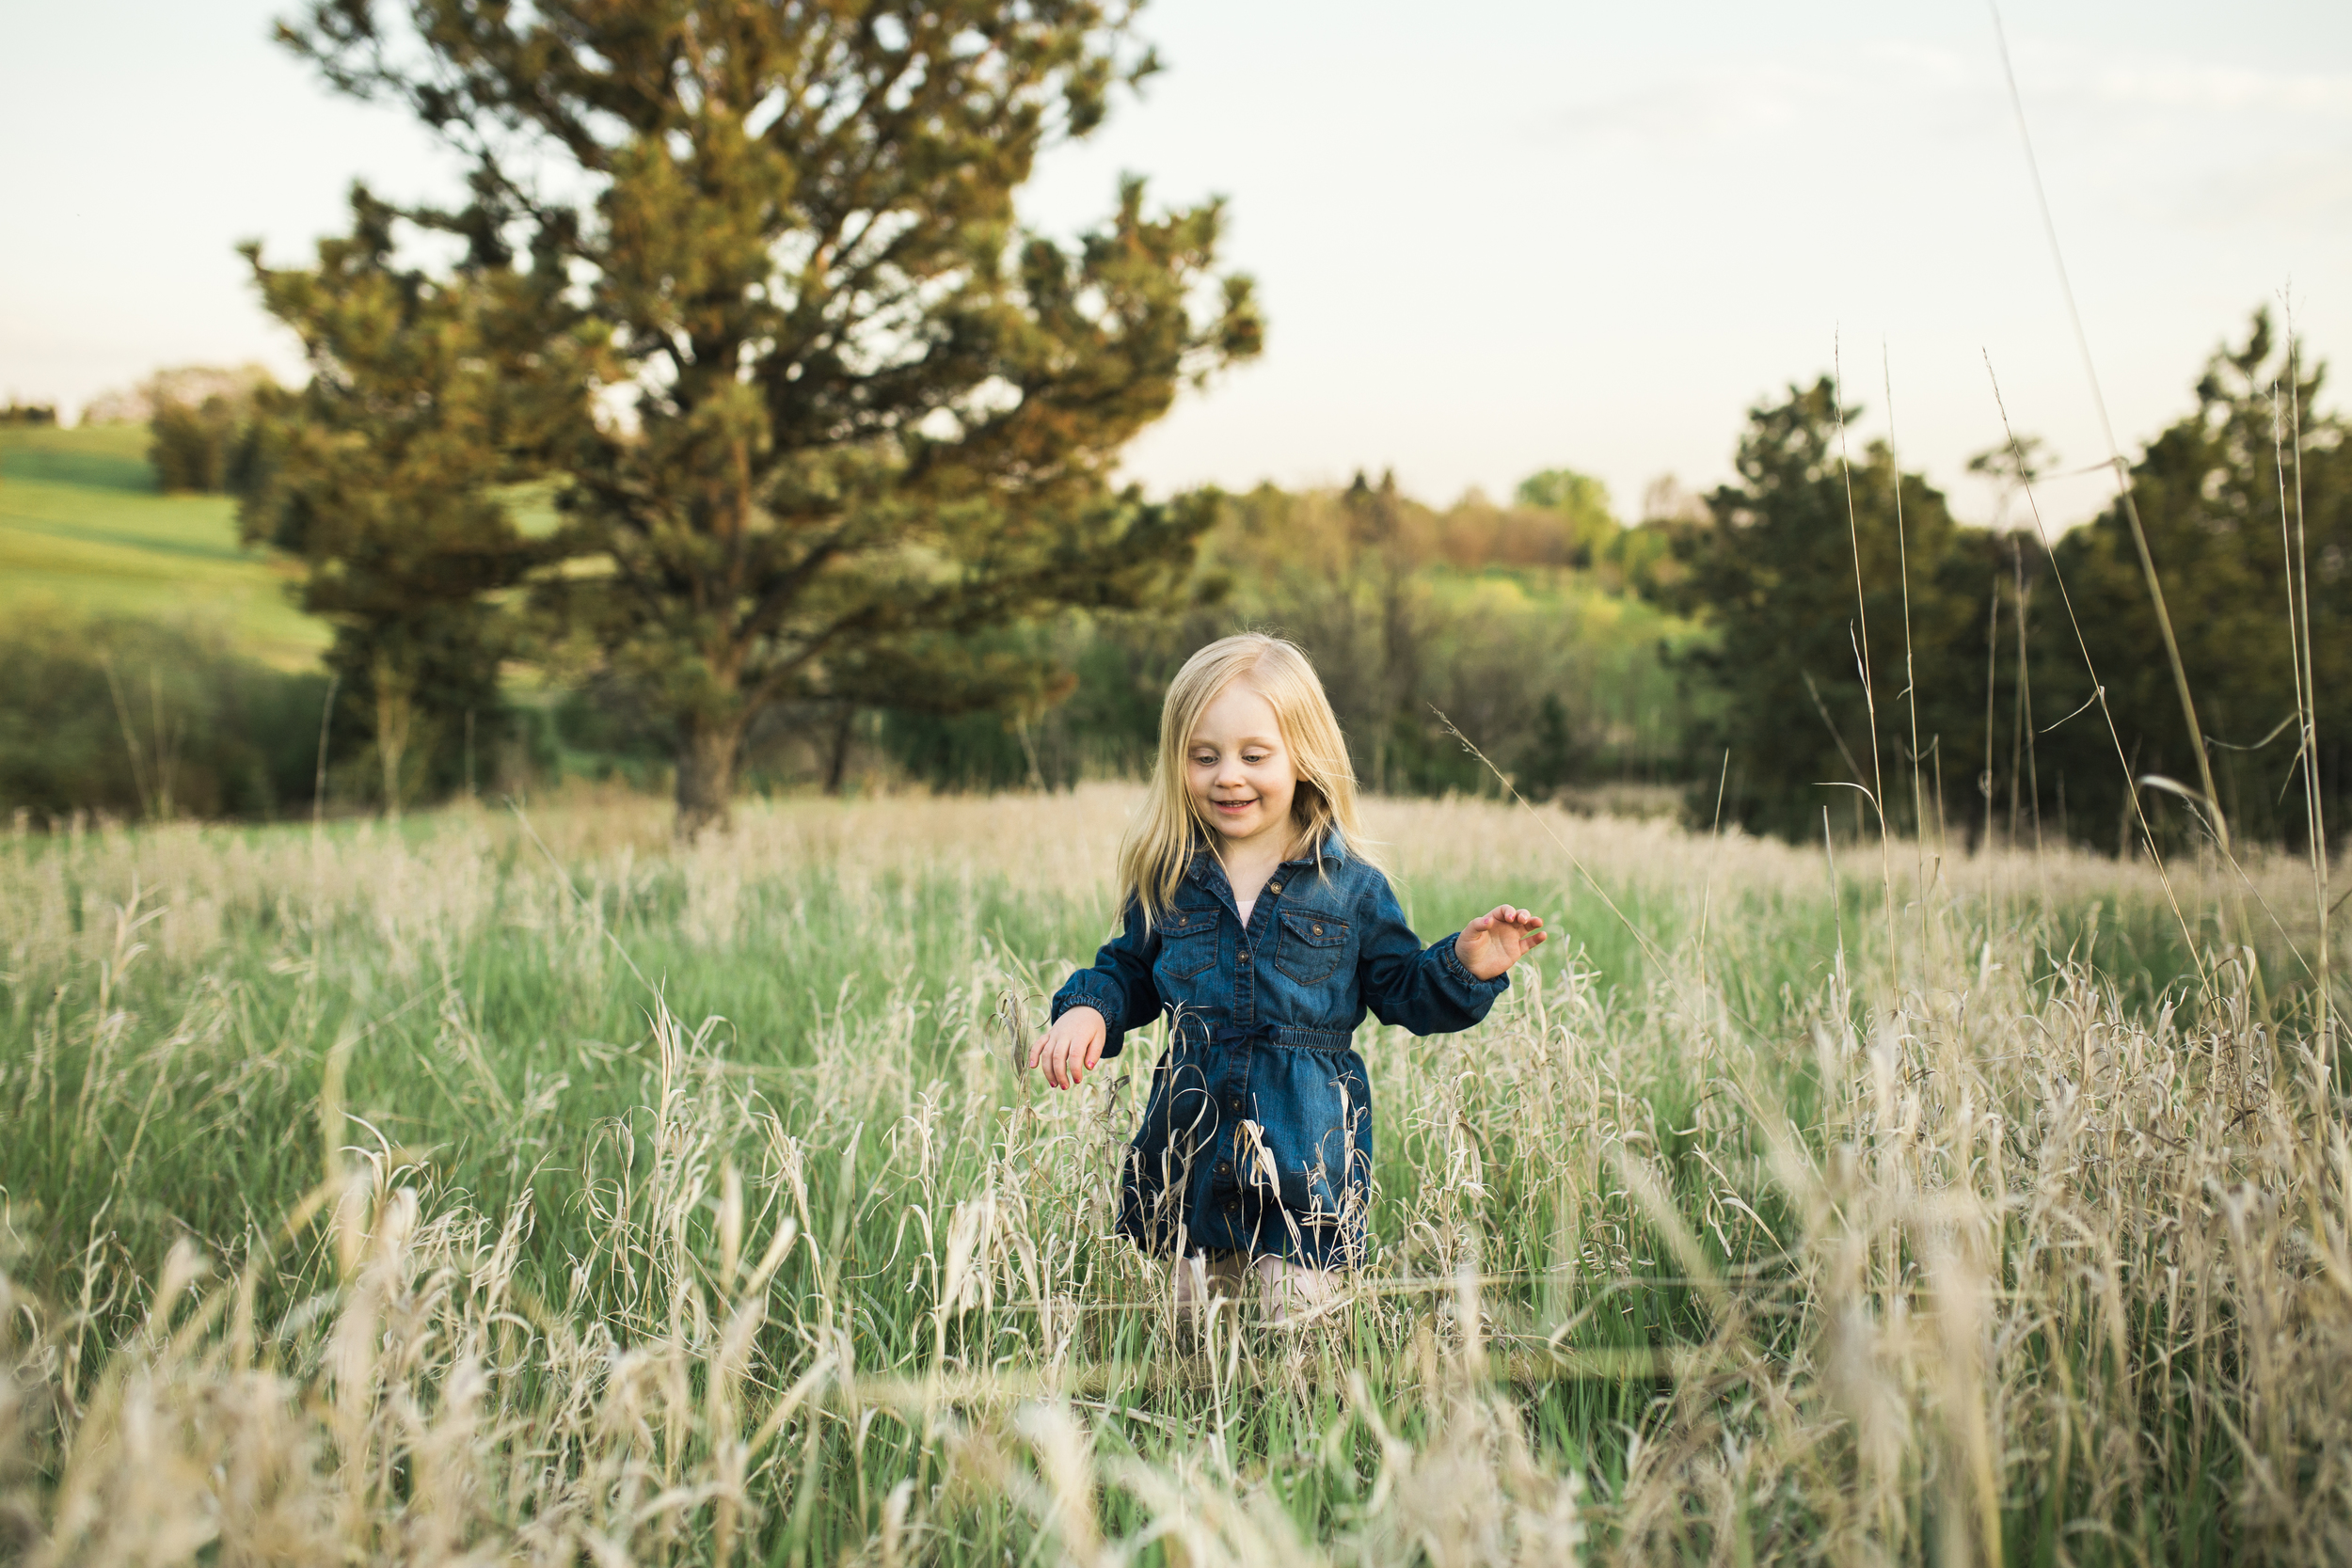 Bismarck, ND Family Photography